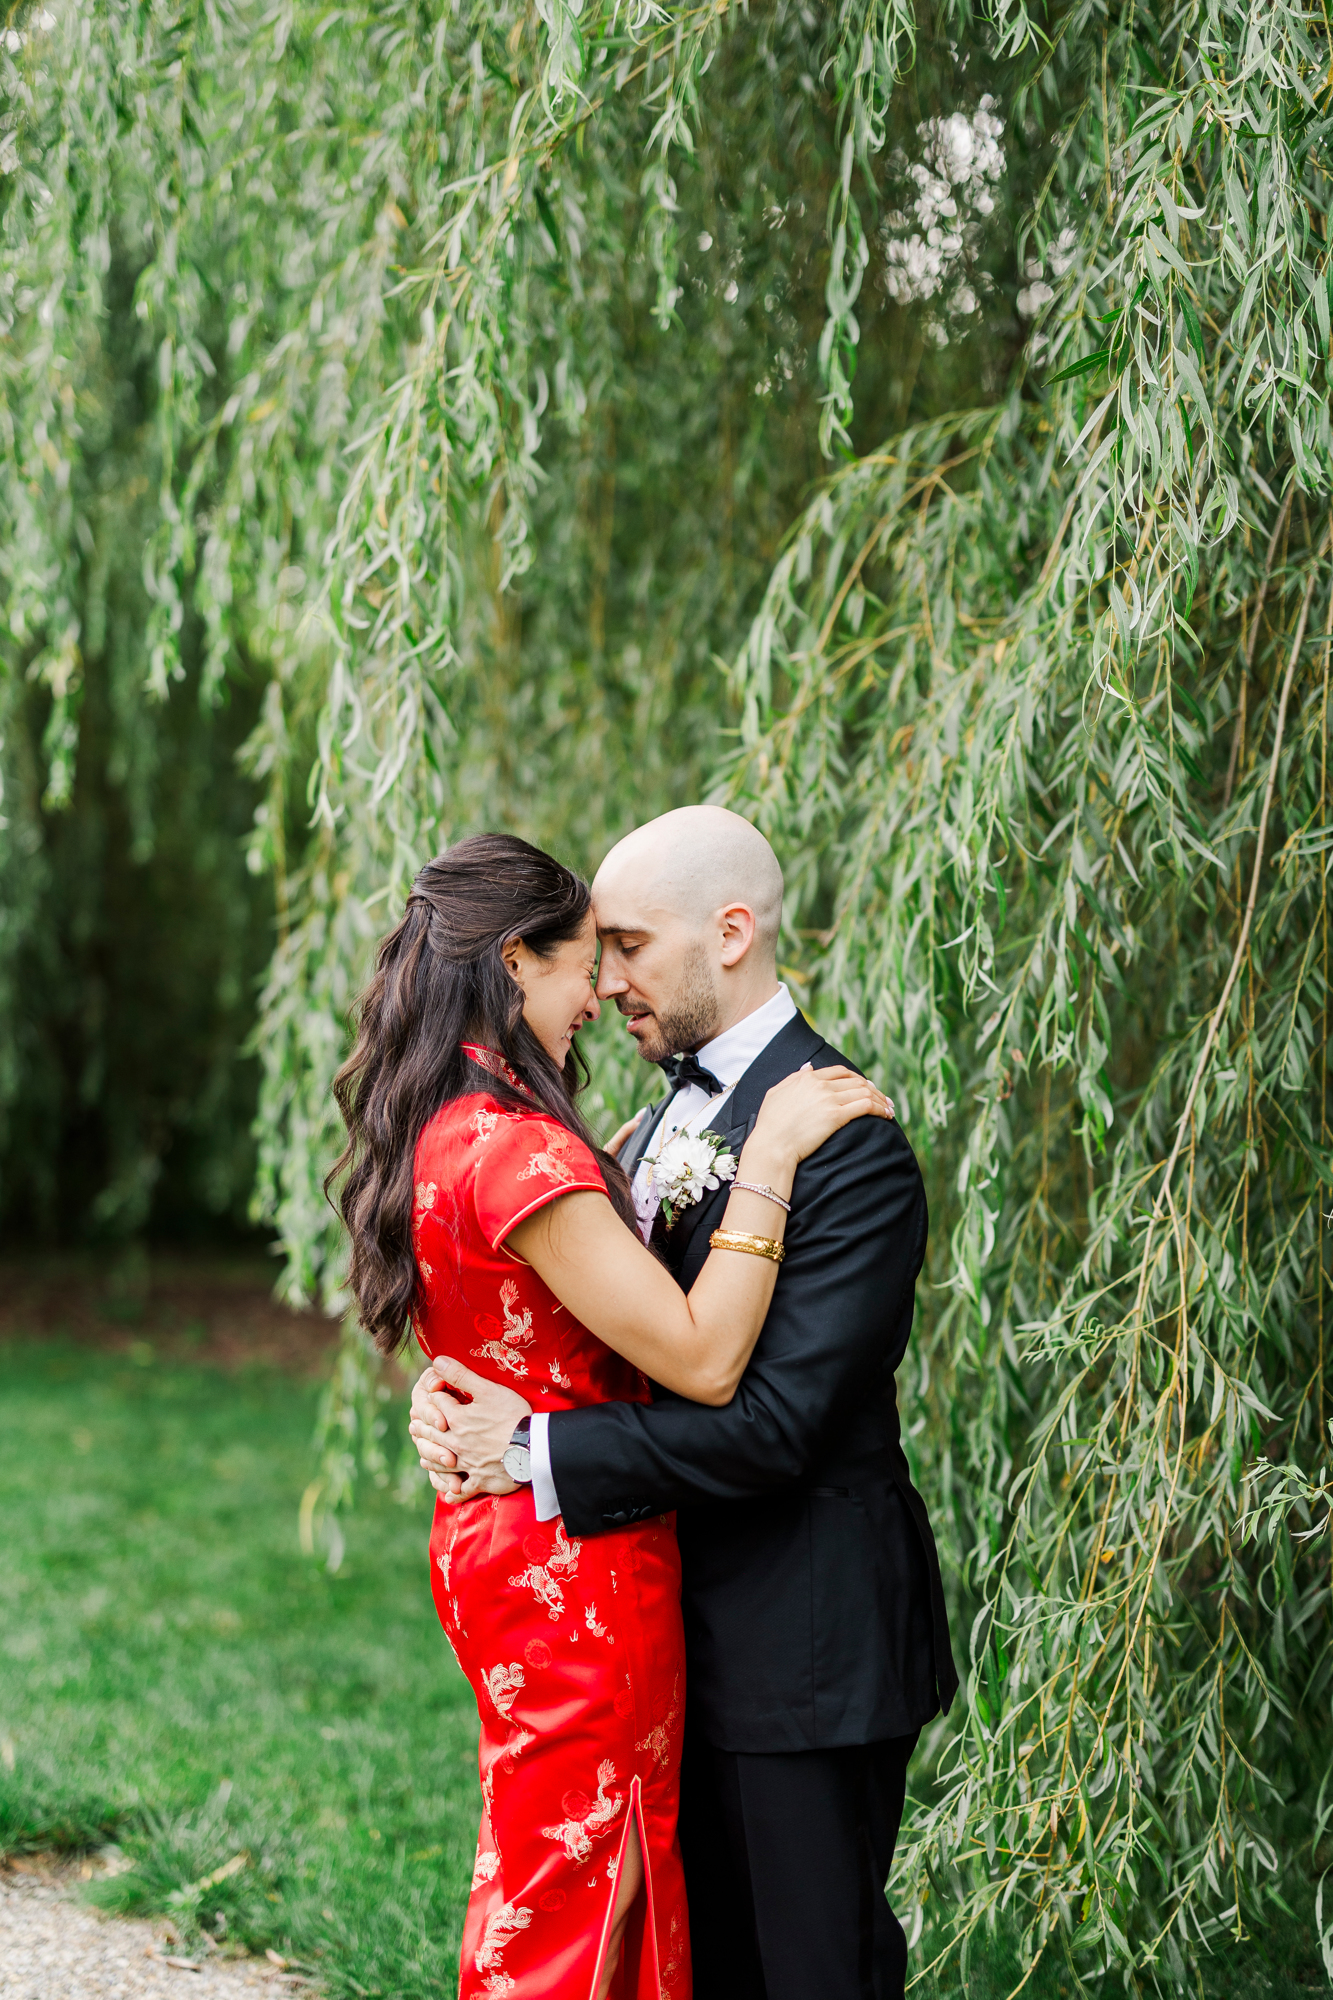 Personal New Jersey Wedding at Crossed Keys Estate